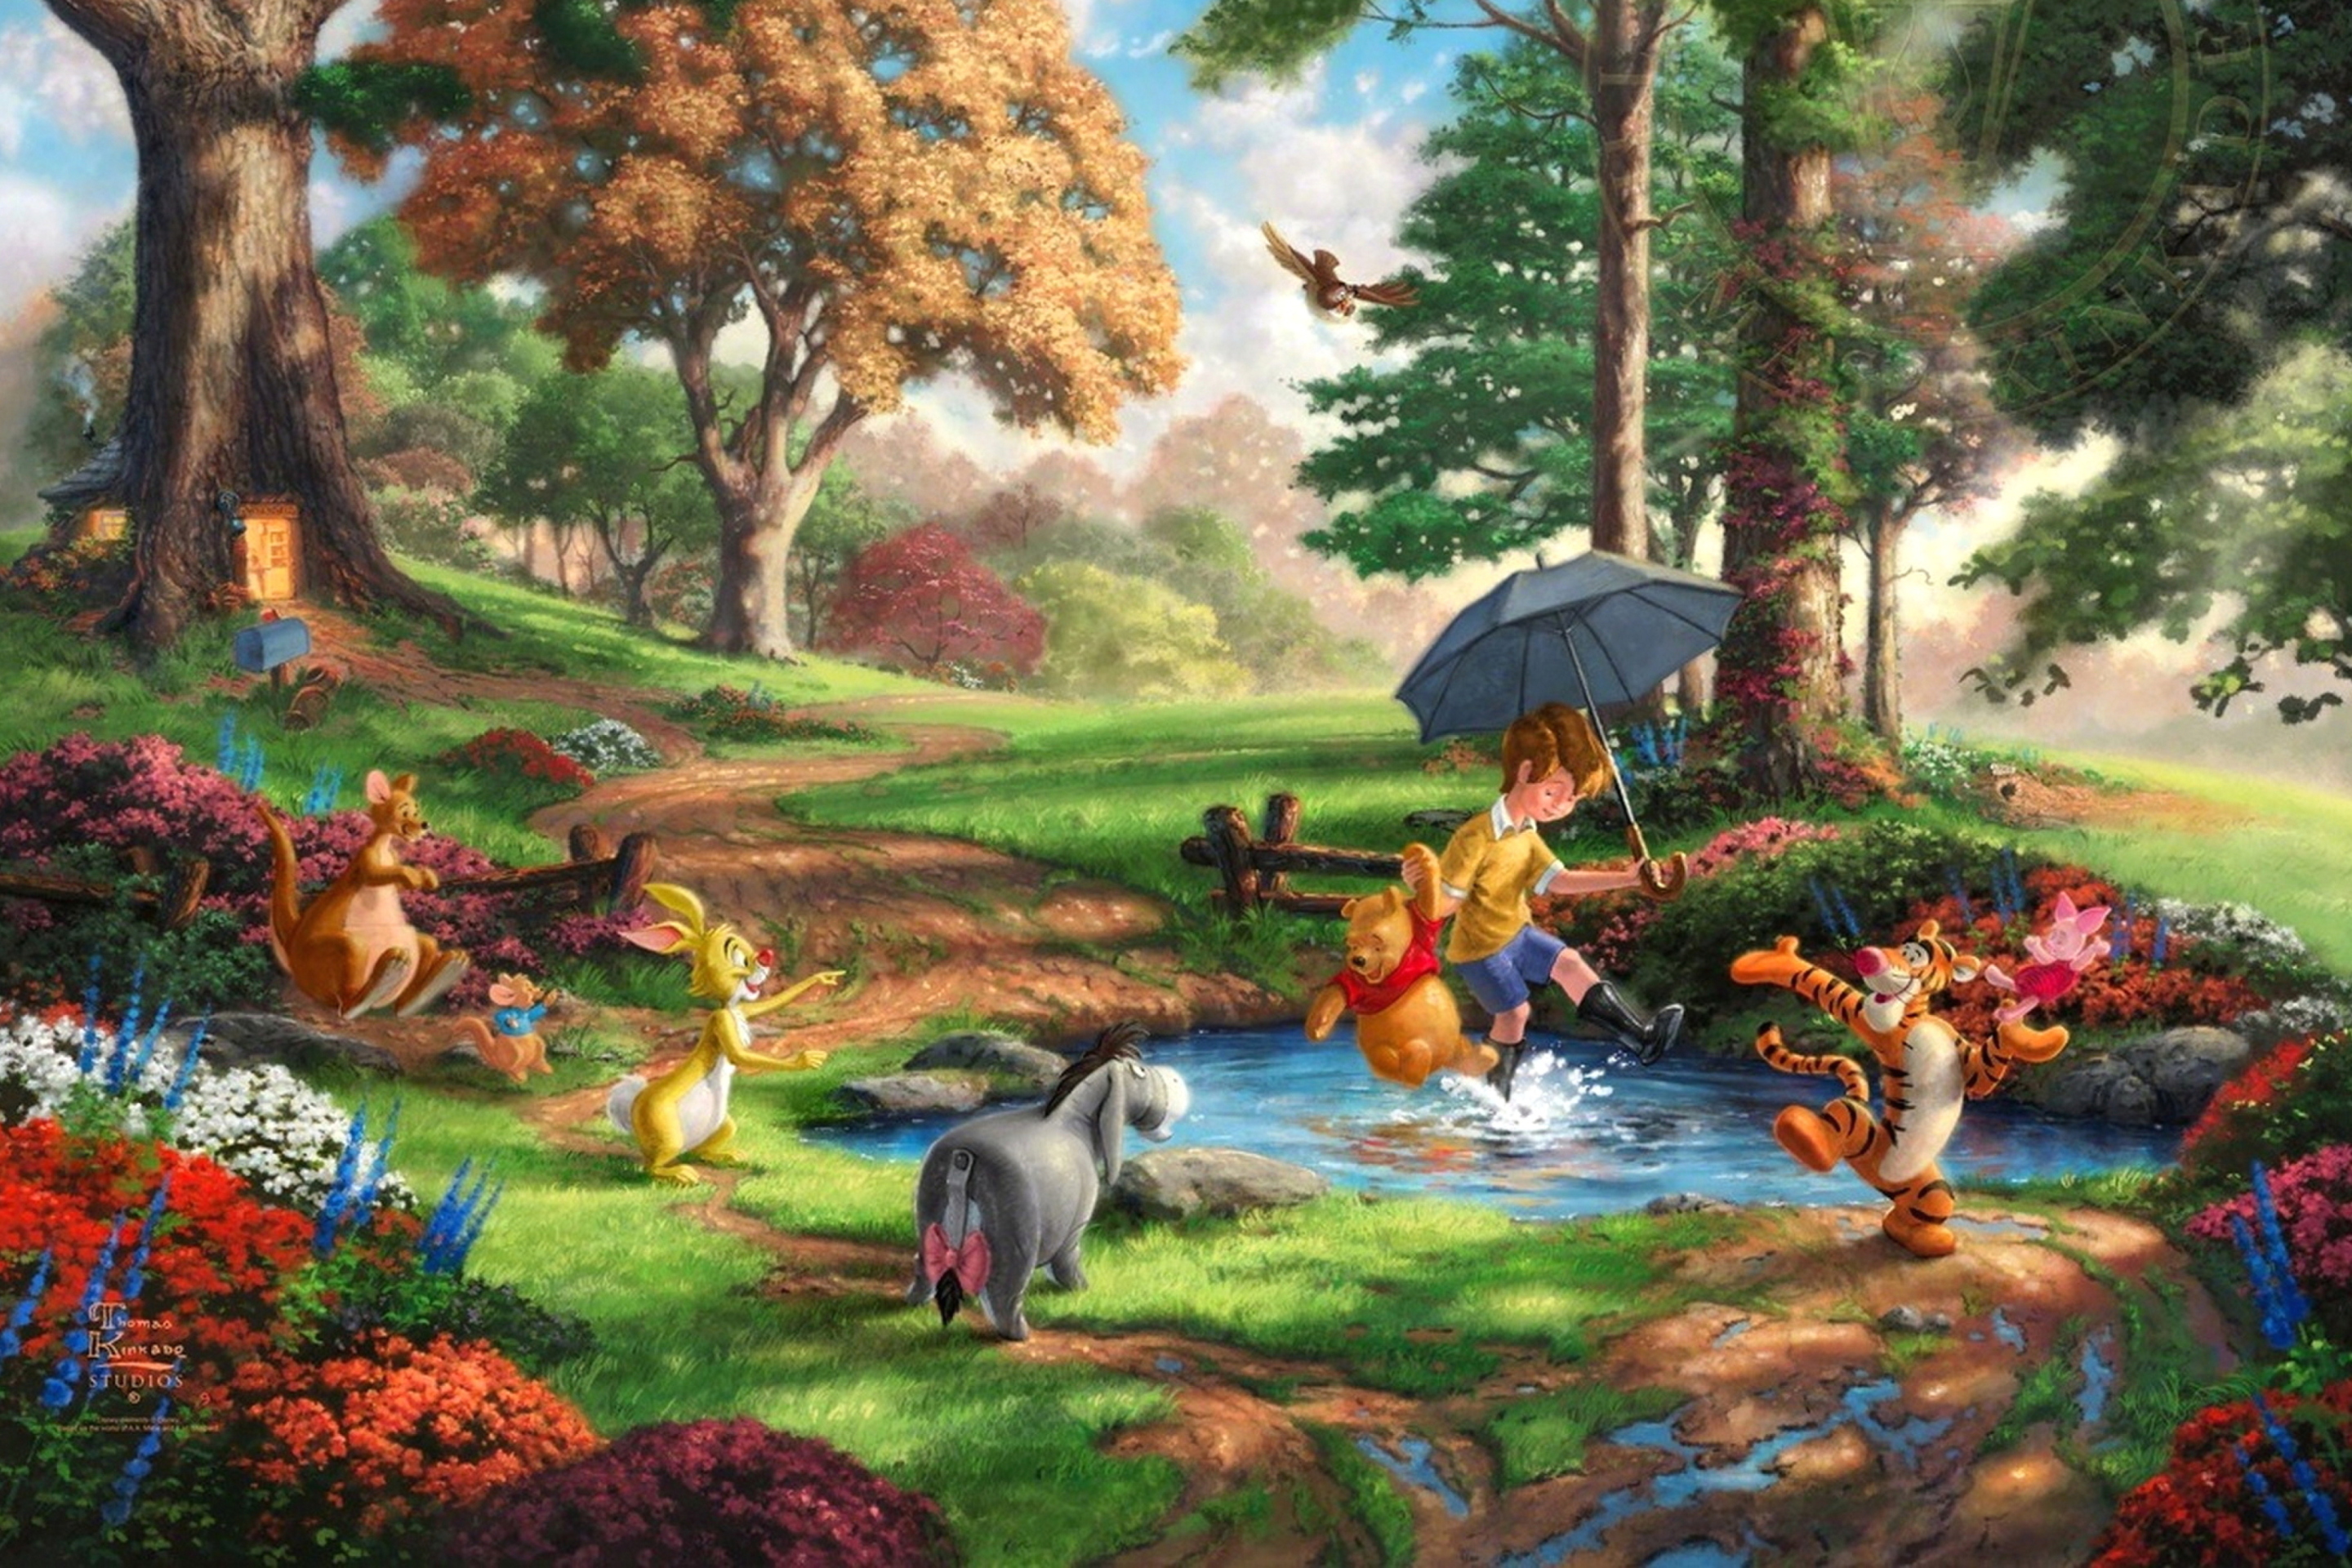 Winnie The Pooh And Friends wallpaper 2880x1920